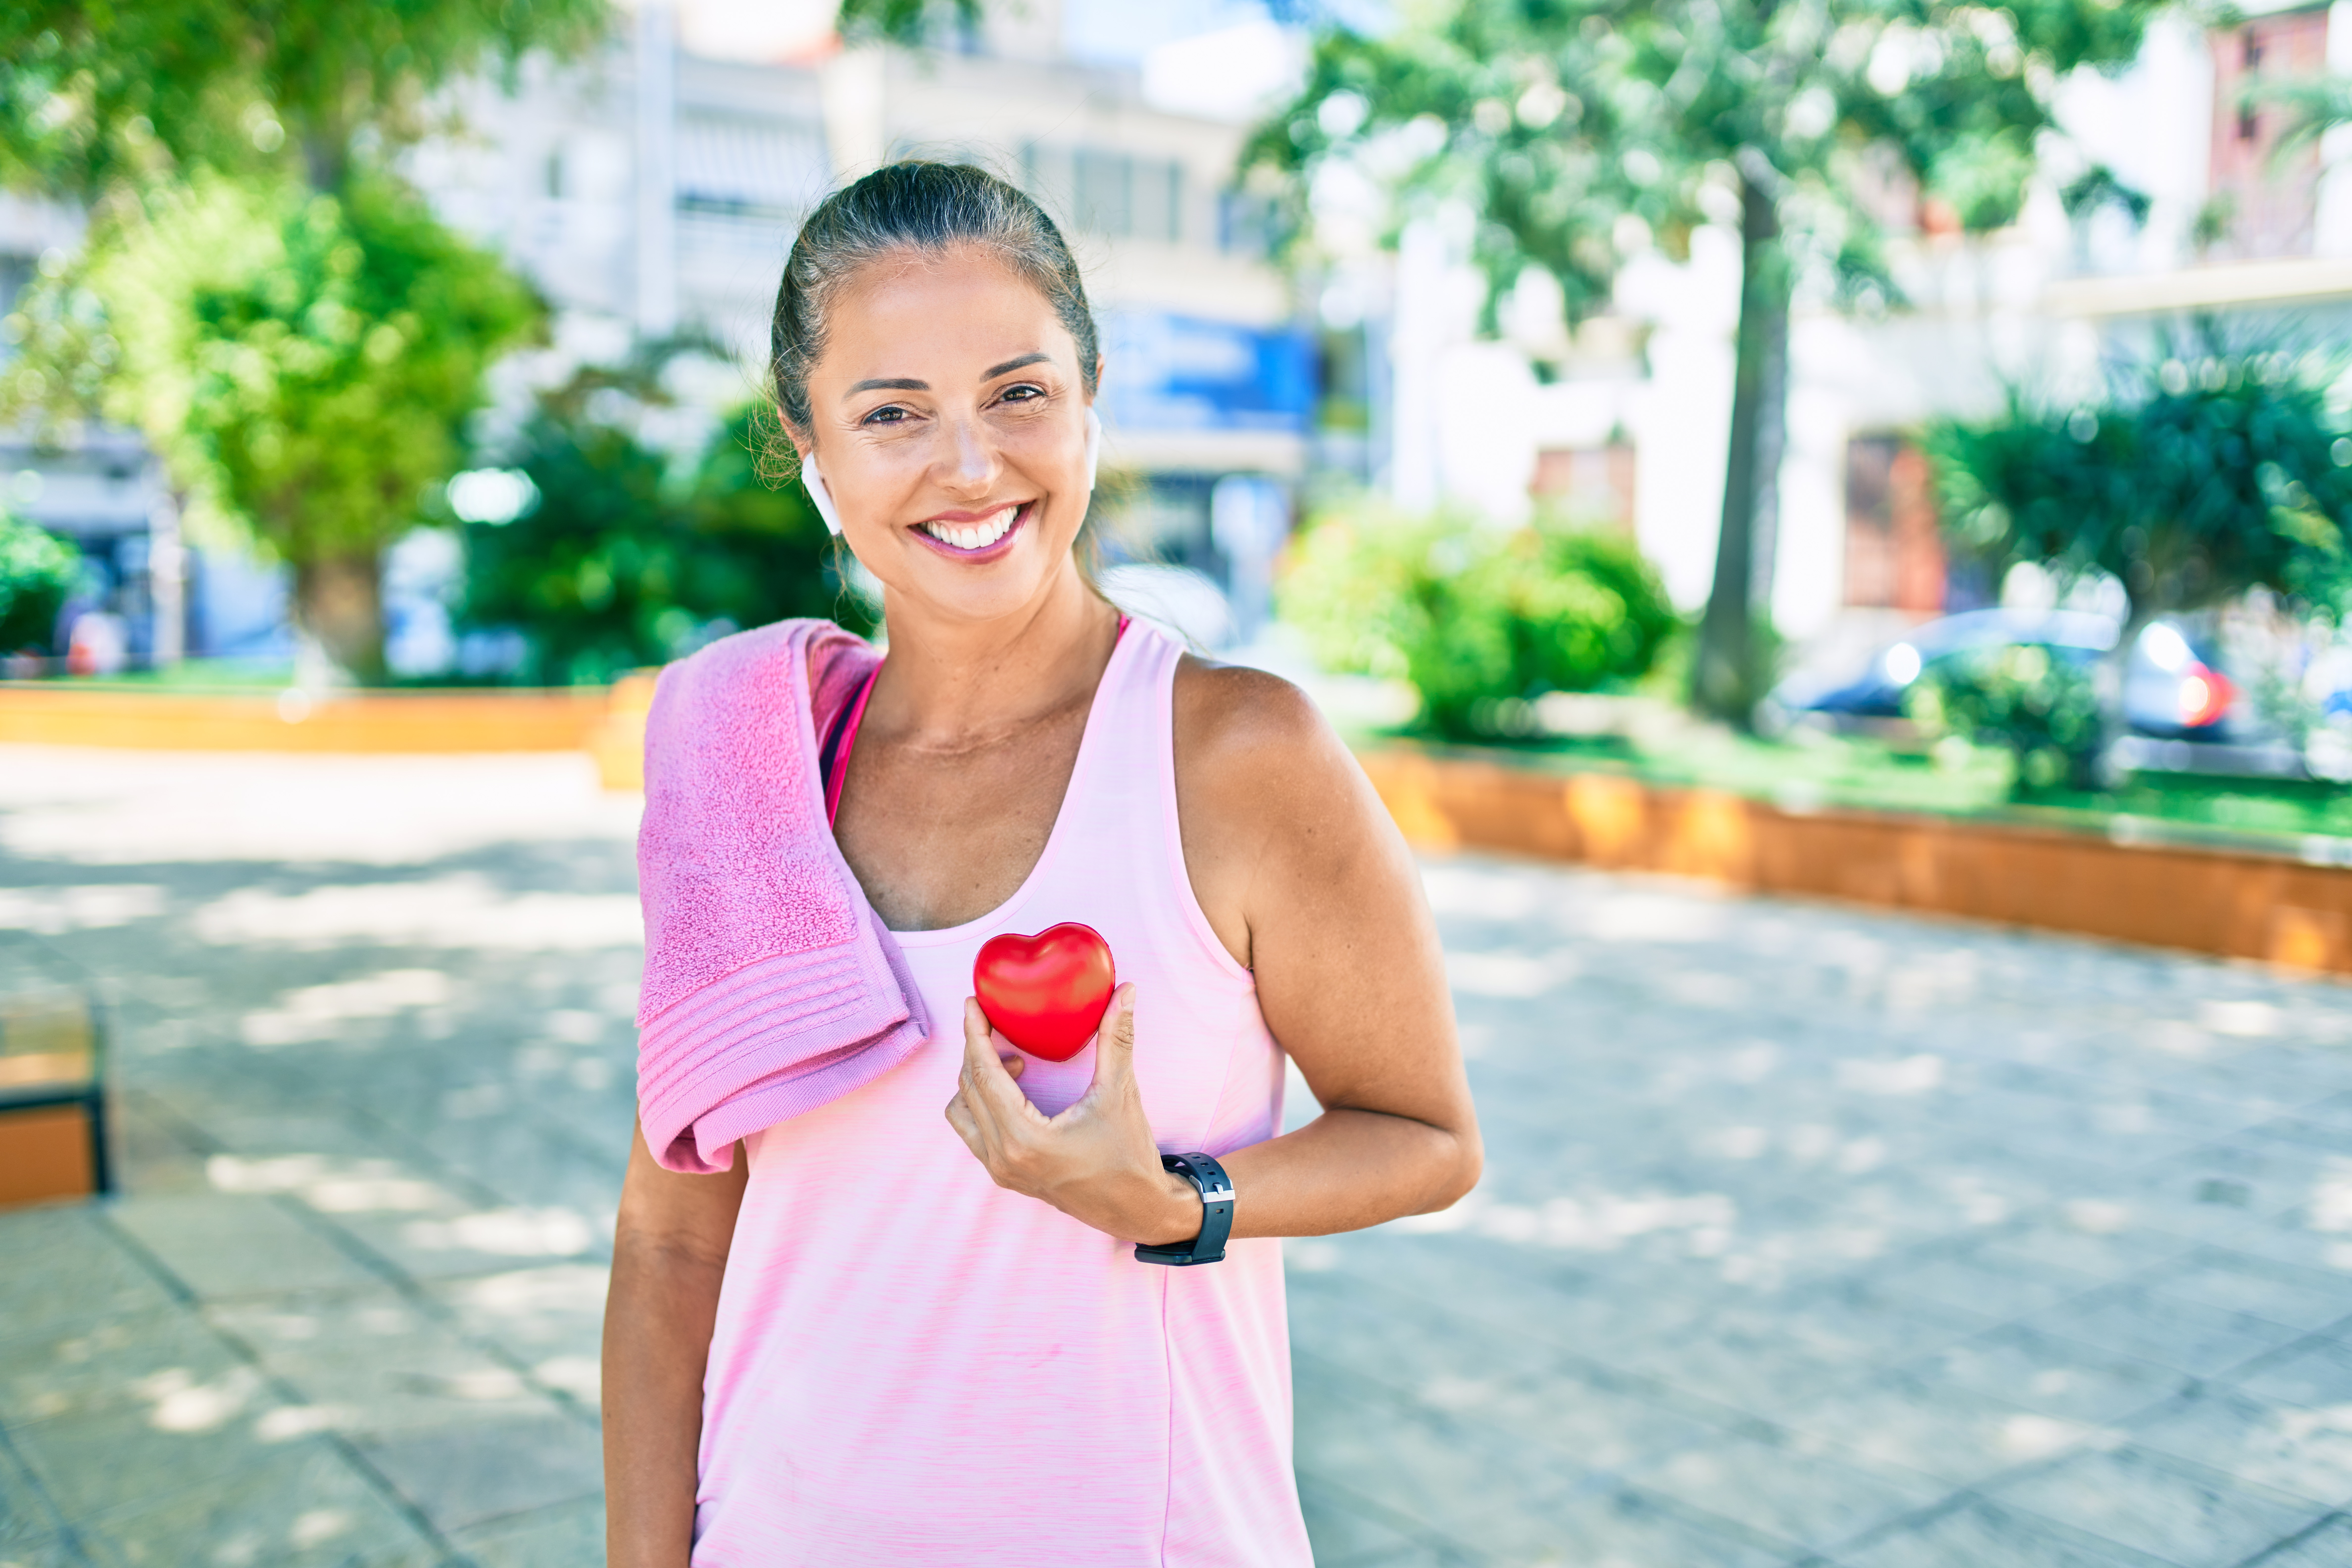 5 Tips for Staying Heart Healthy